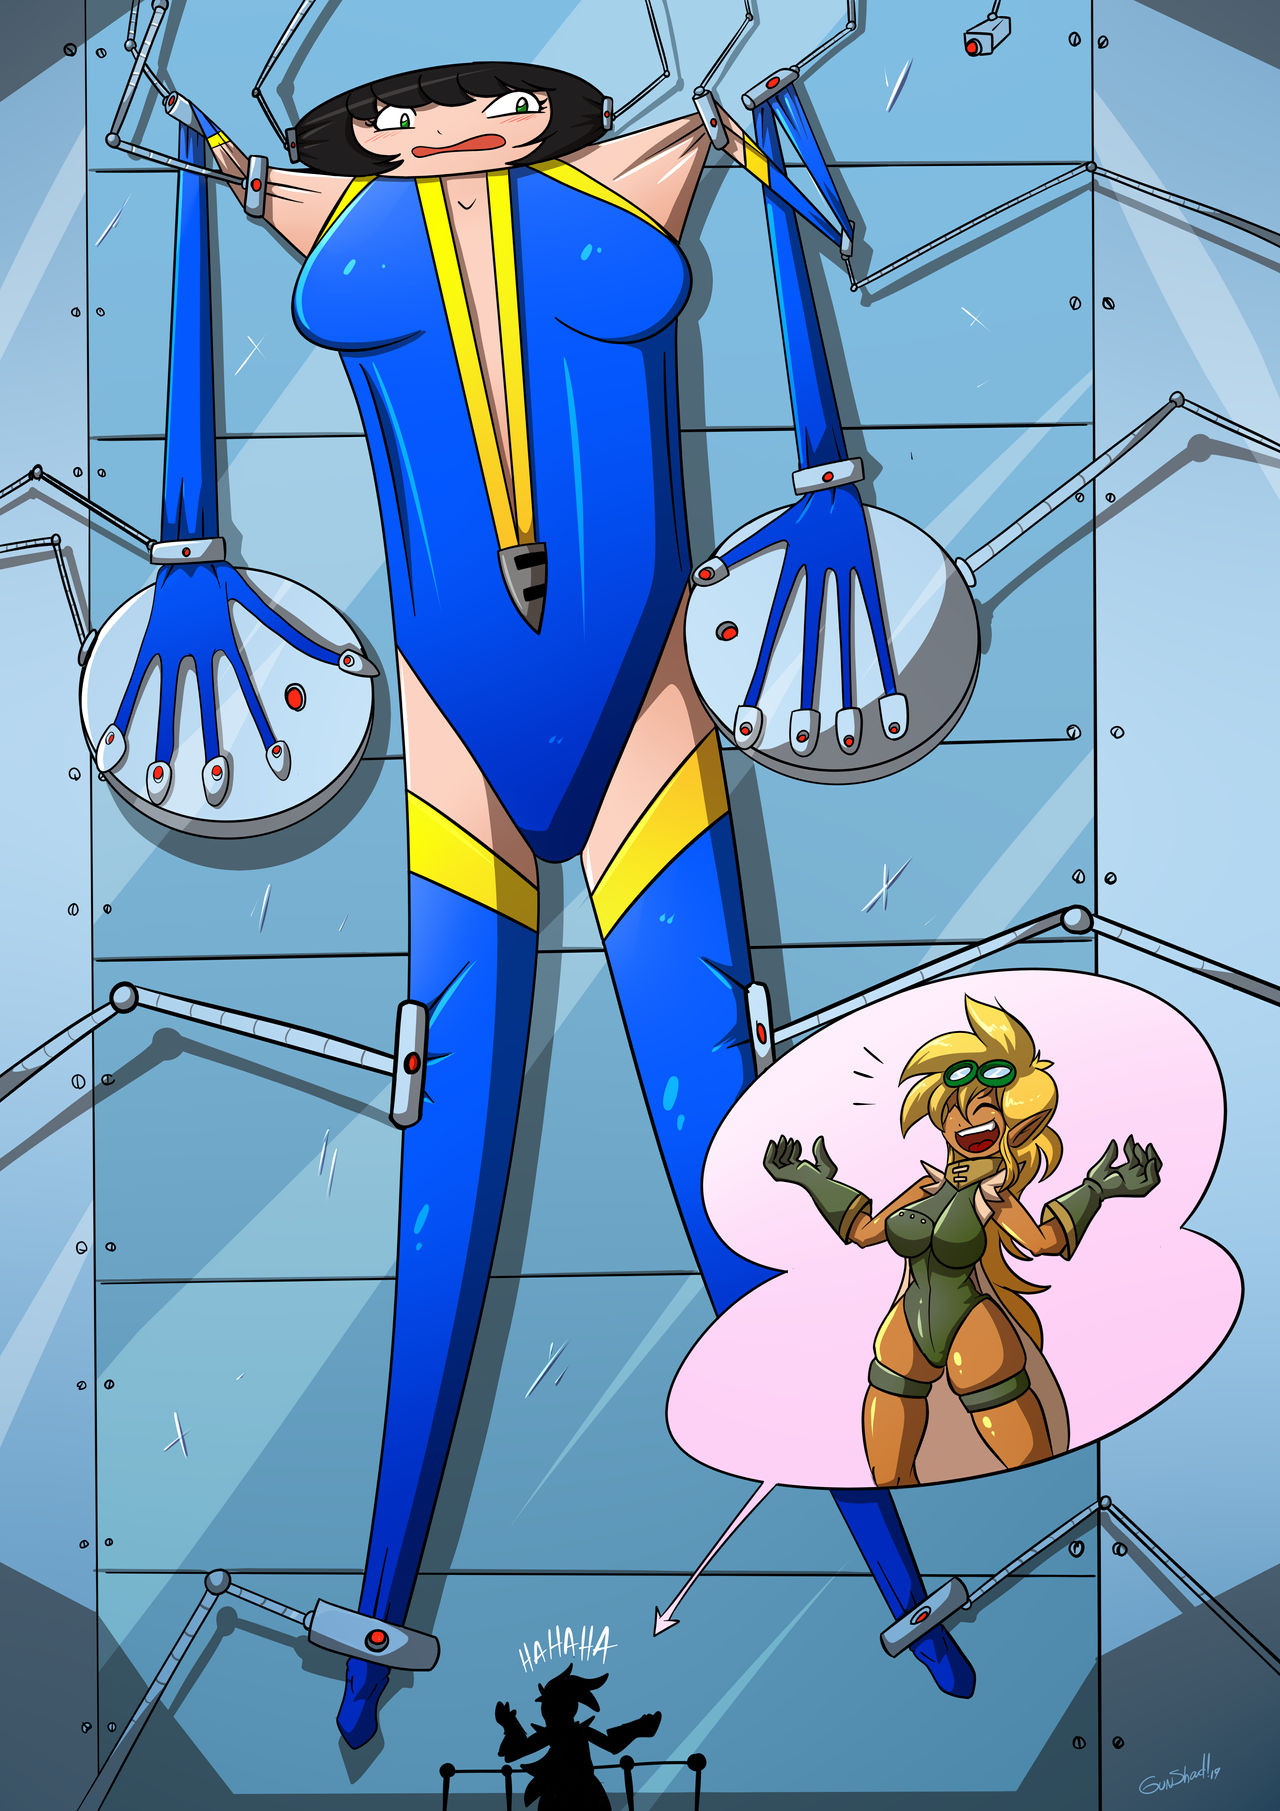 Rita stretched and immobilized by rodriguis on DeviantArt